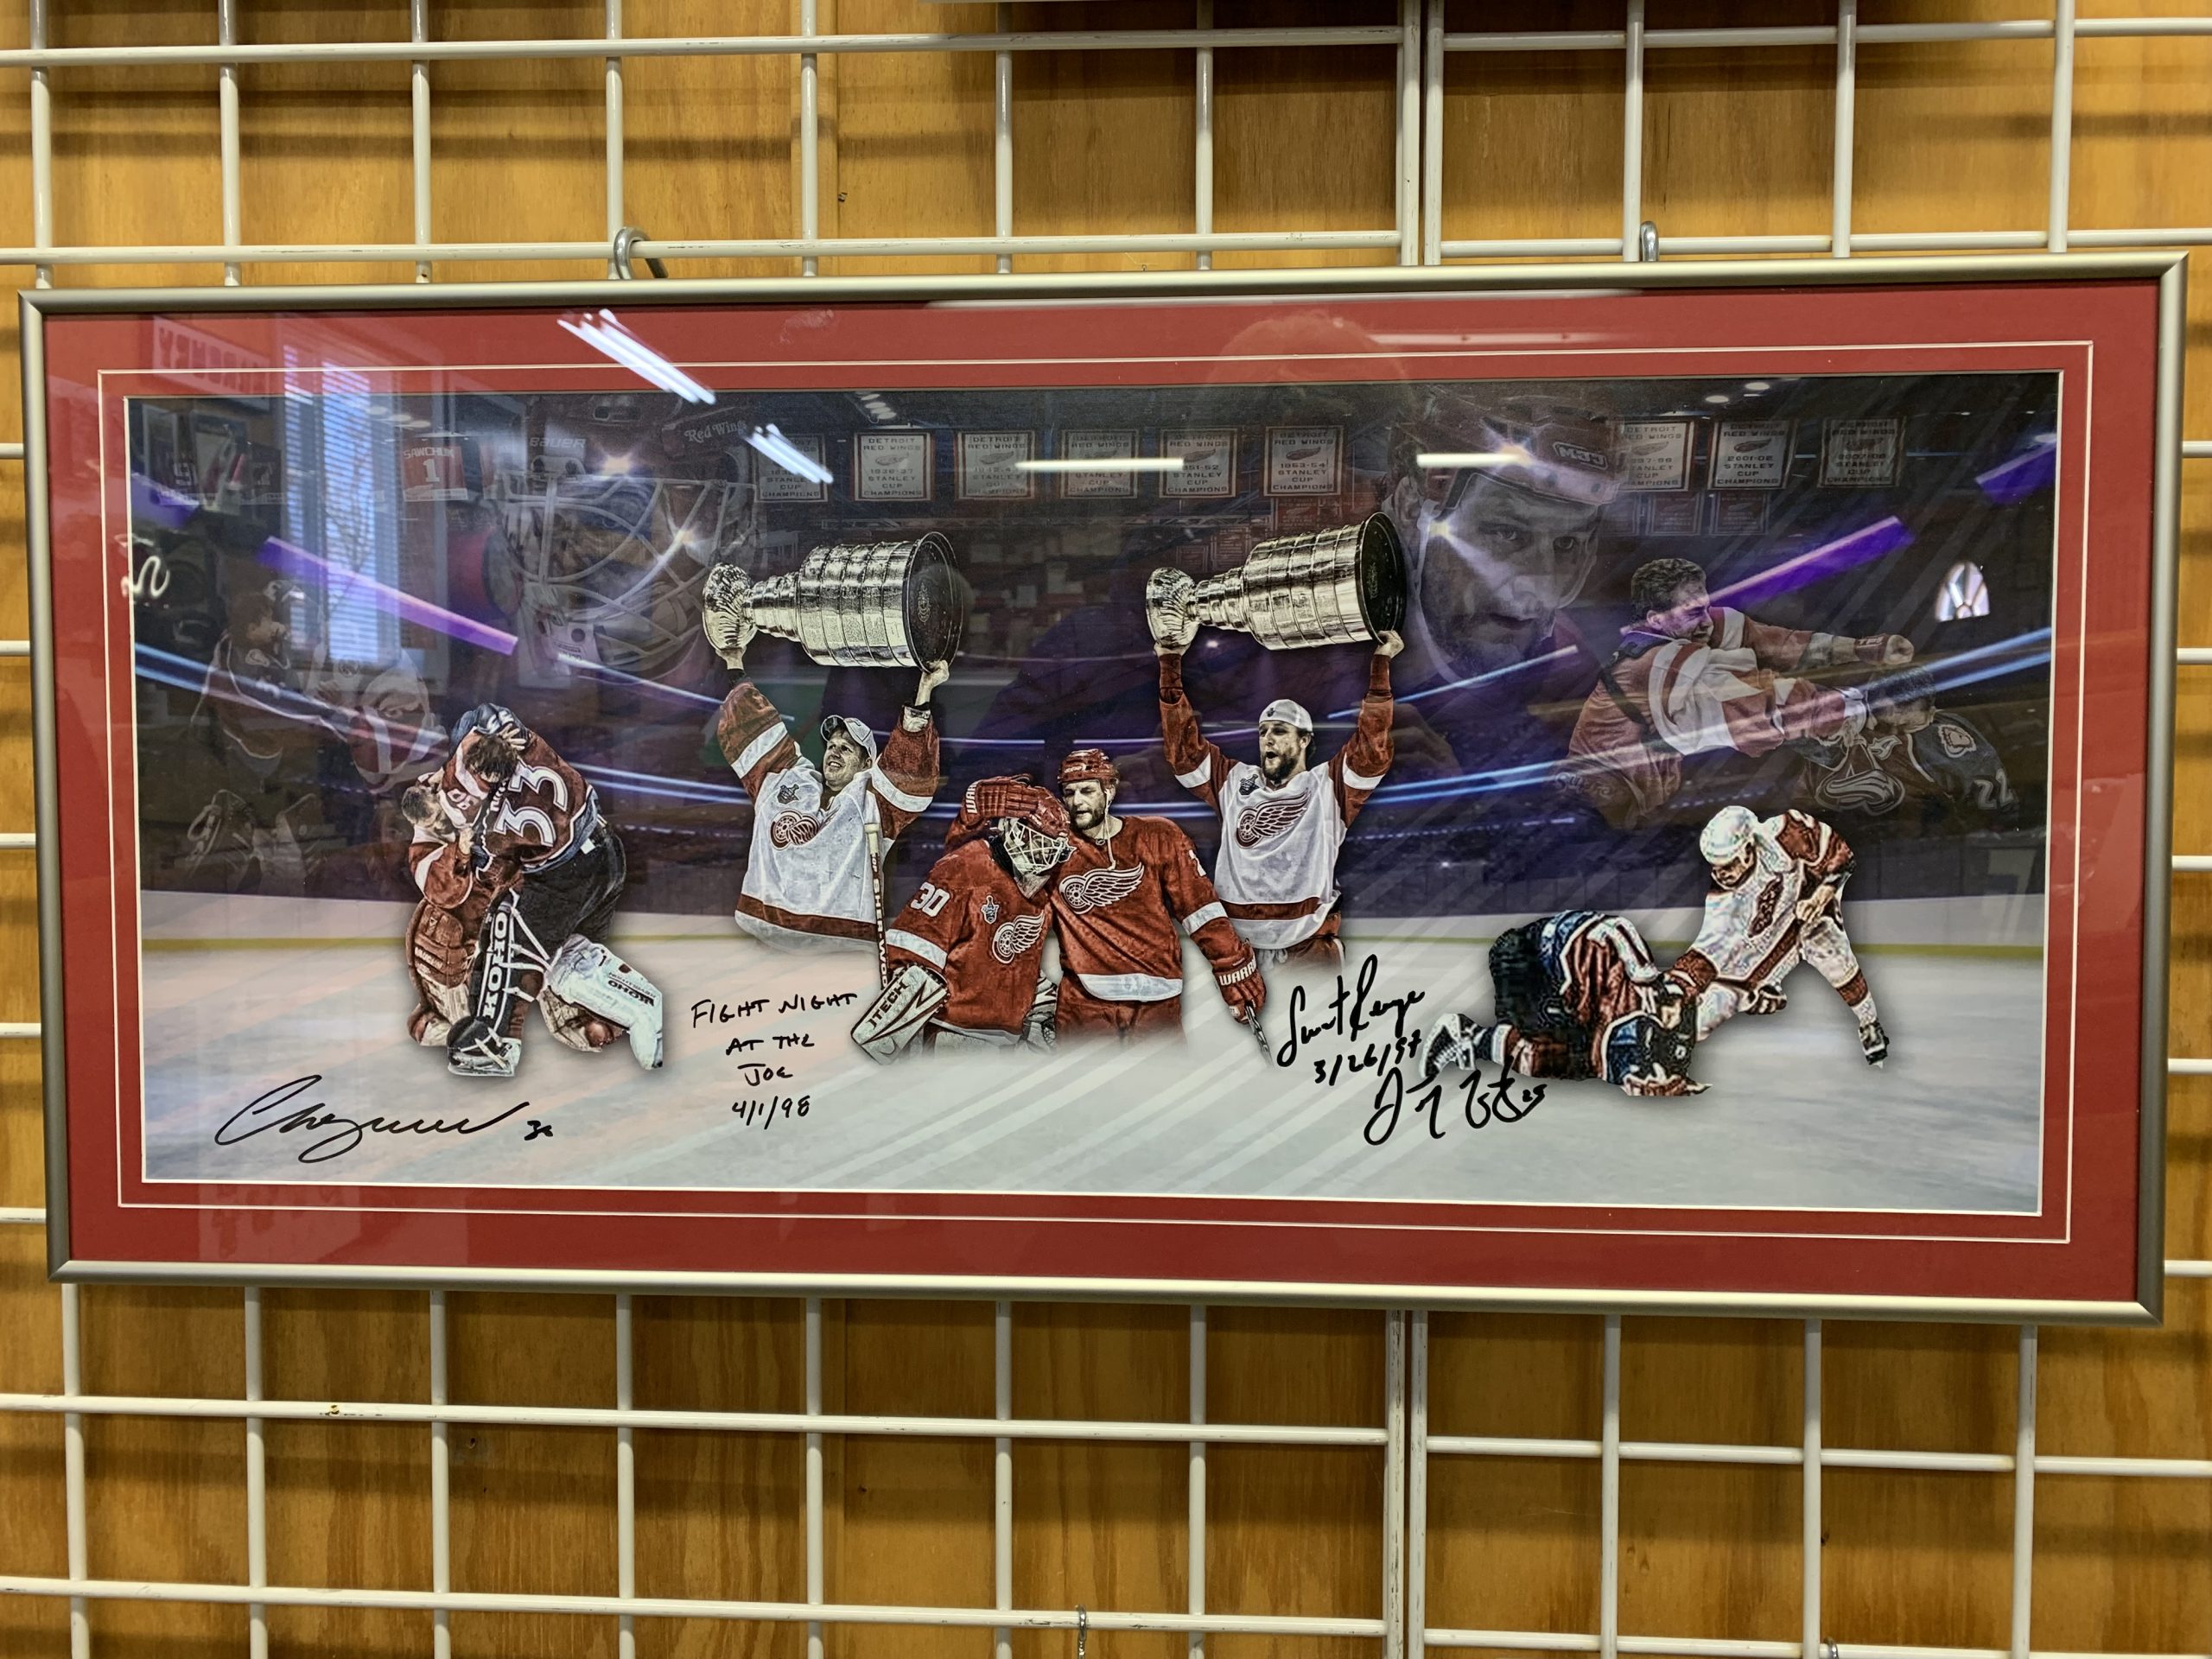 Redwings signed poster